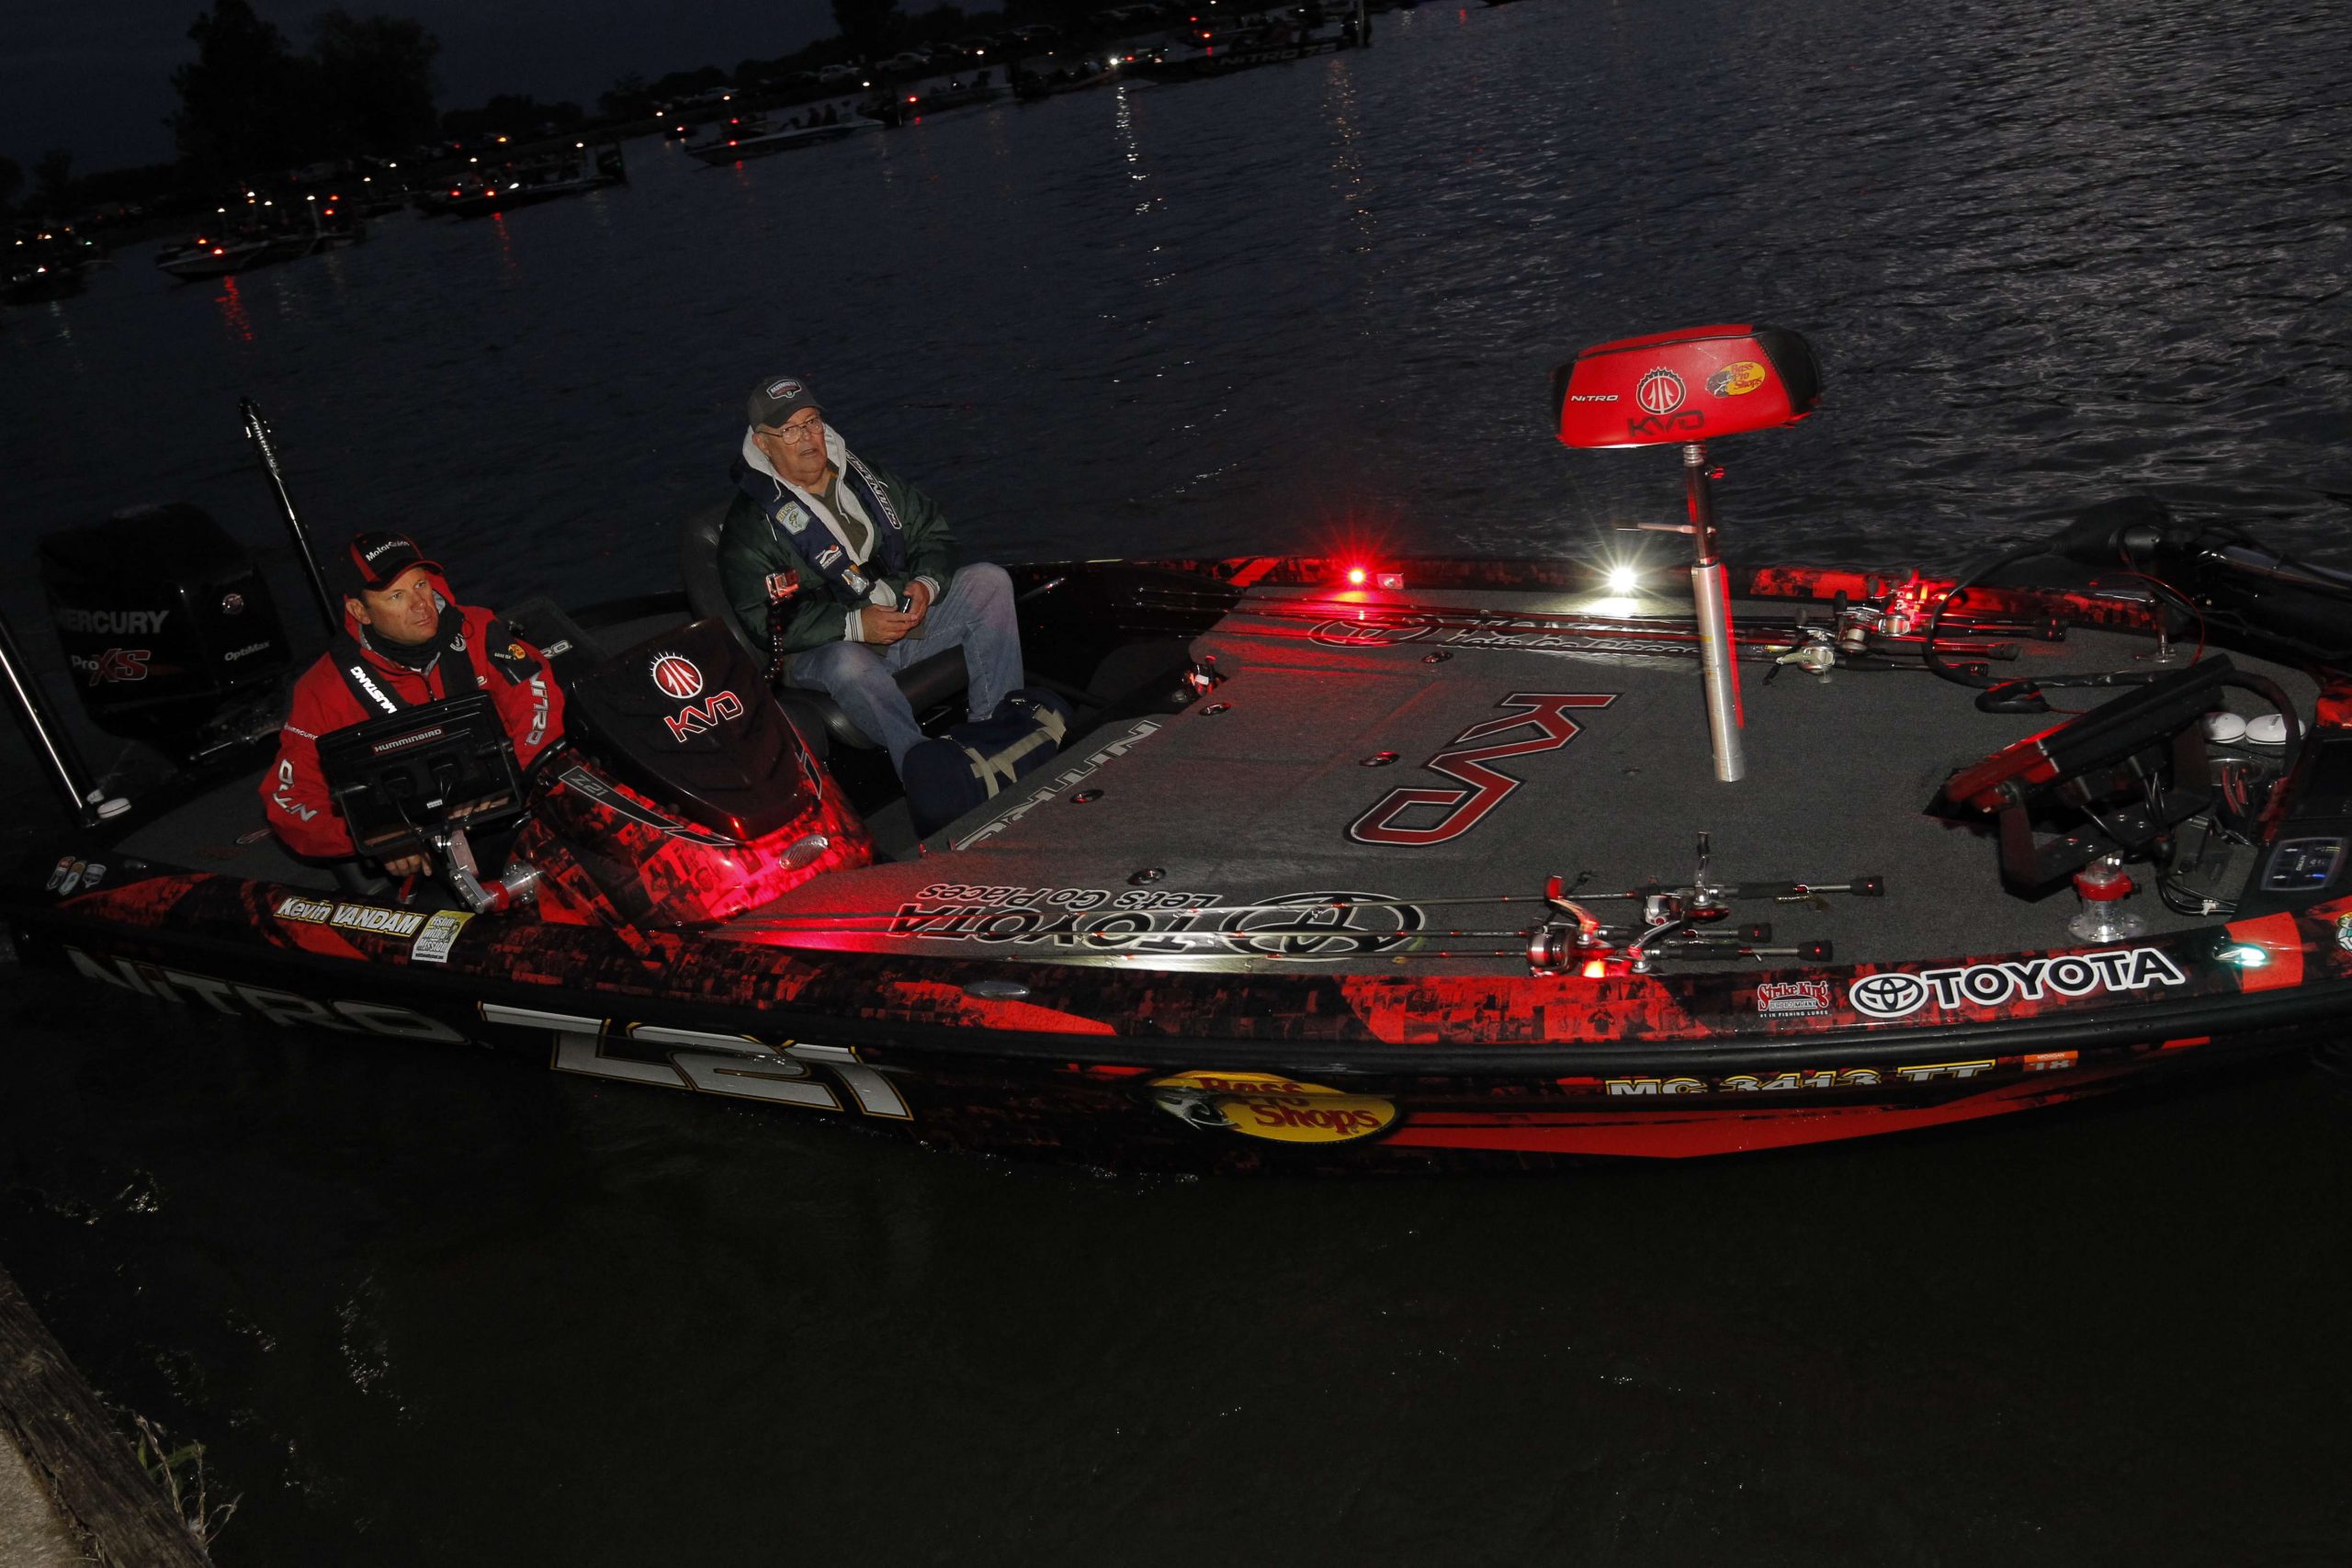 Kevin VanDam shows his early-morning game face.